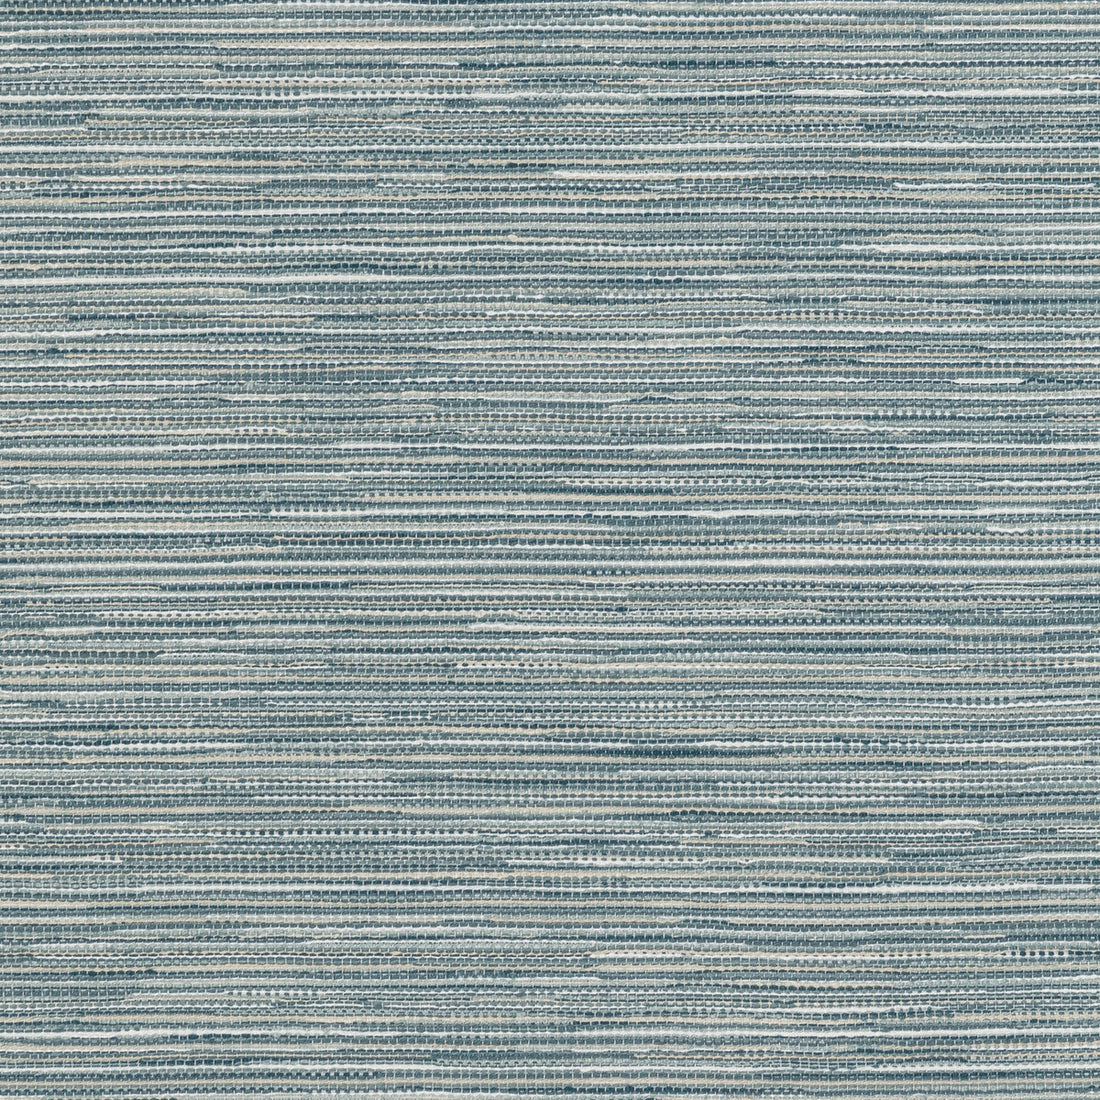 Orozco Weave fabric in marine color - pattern 2021104.5.0 - by Lee Jofa in the Triana Weaves collection